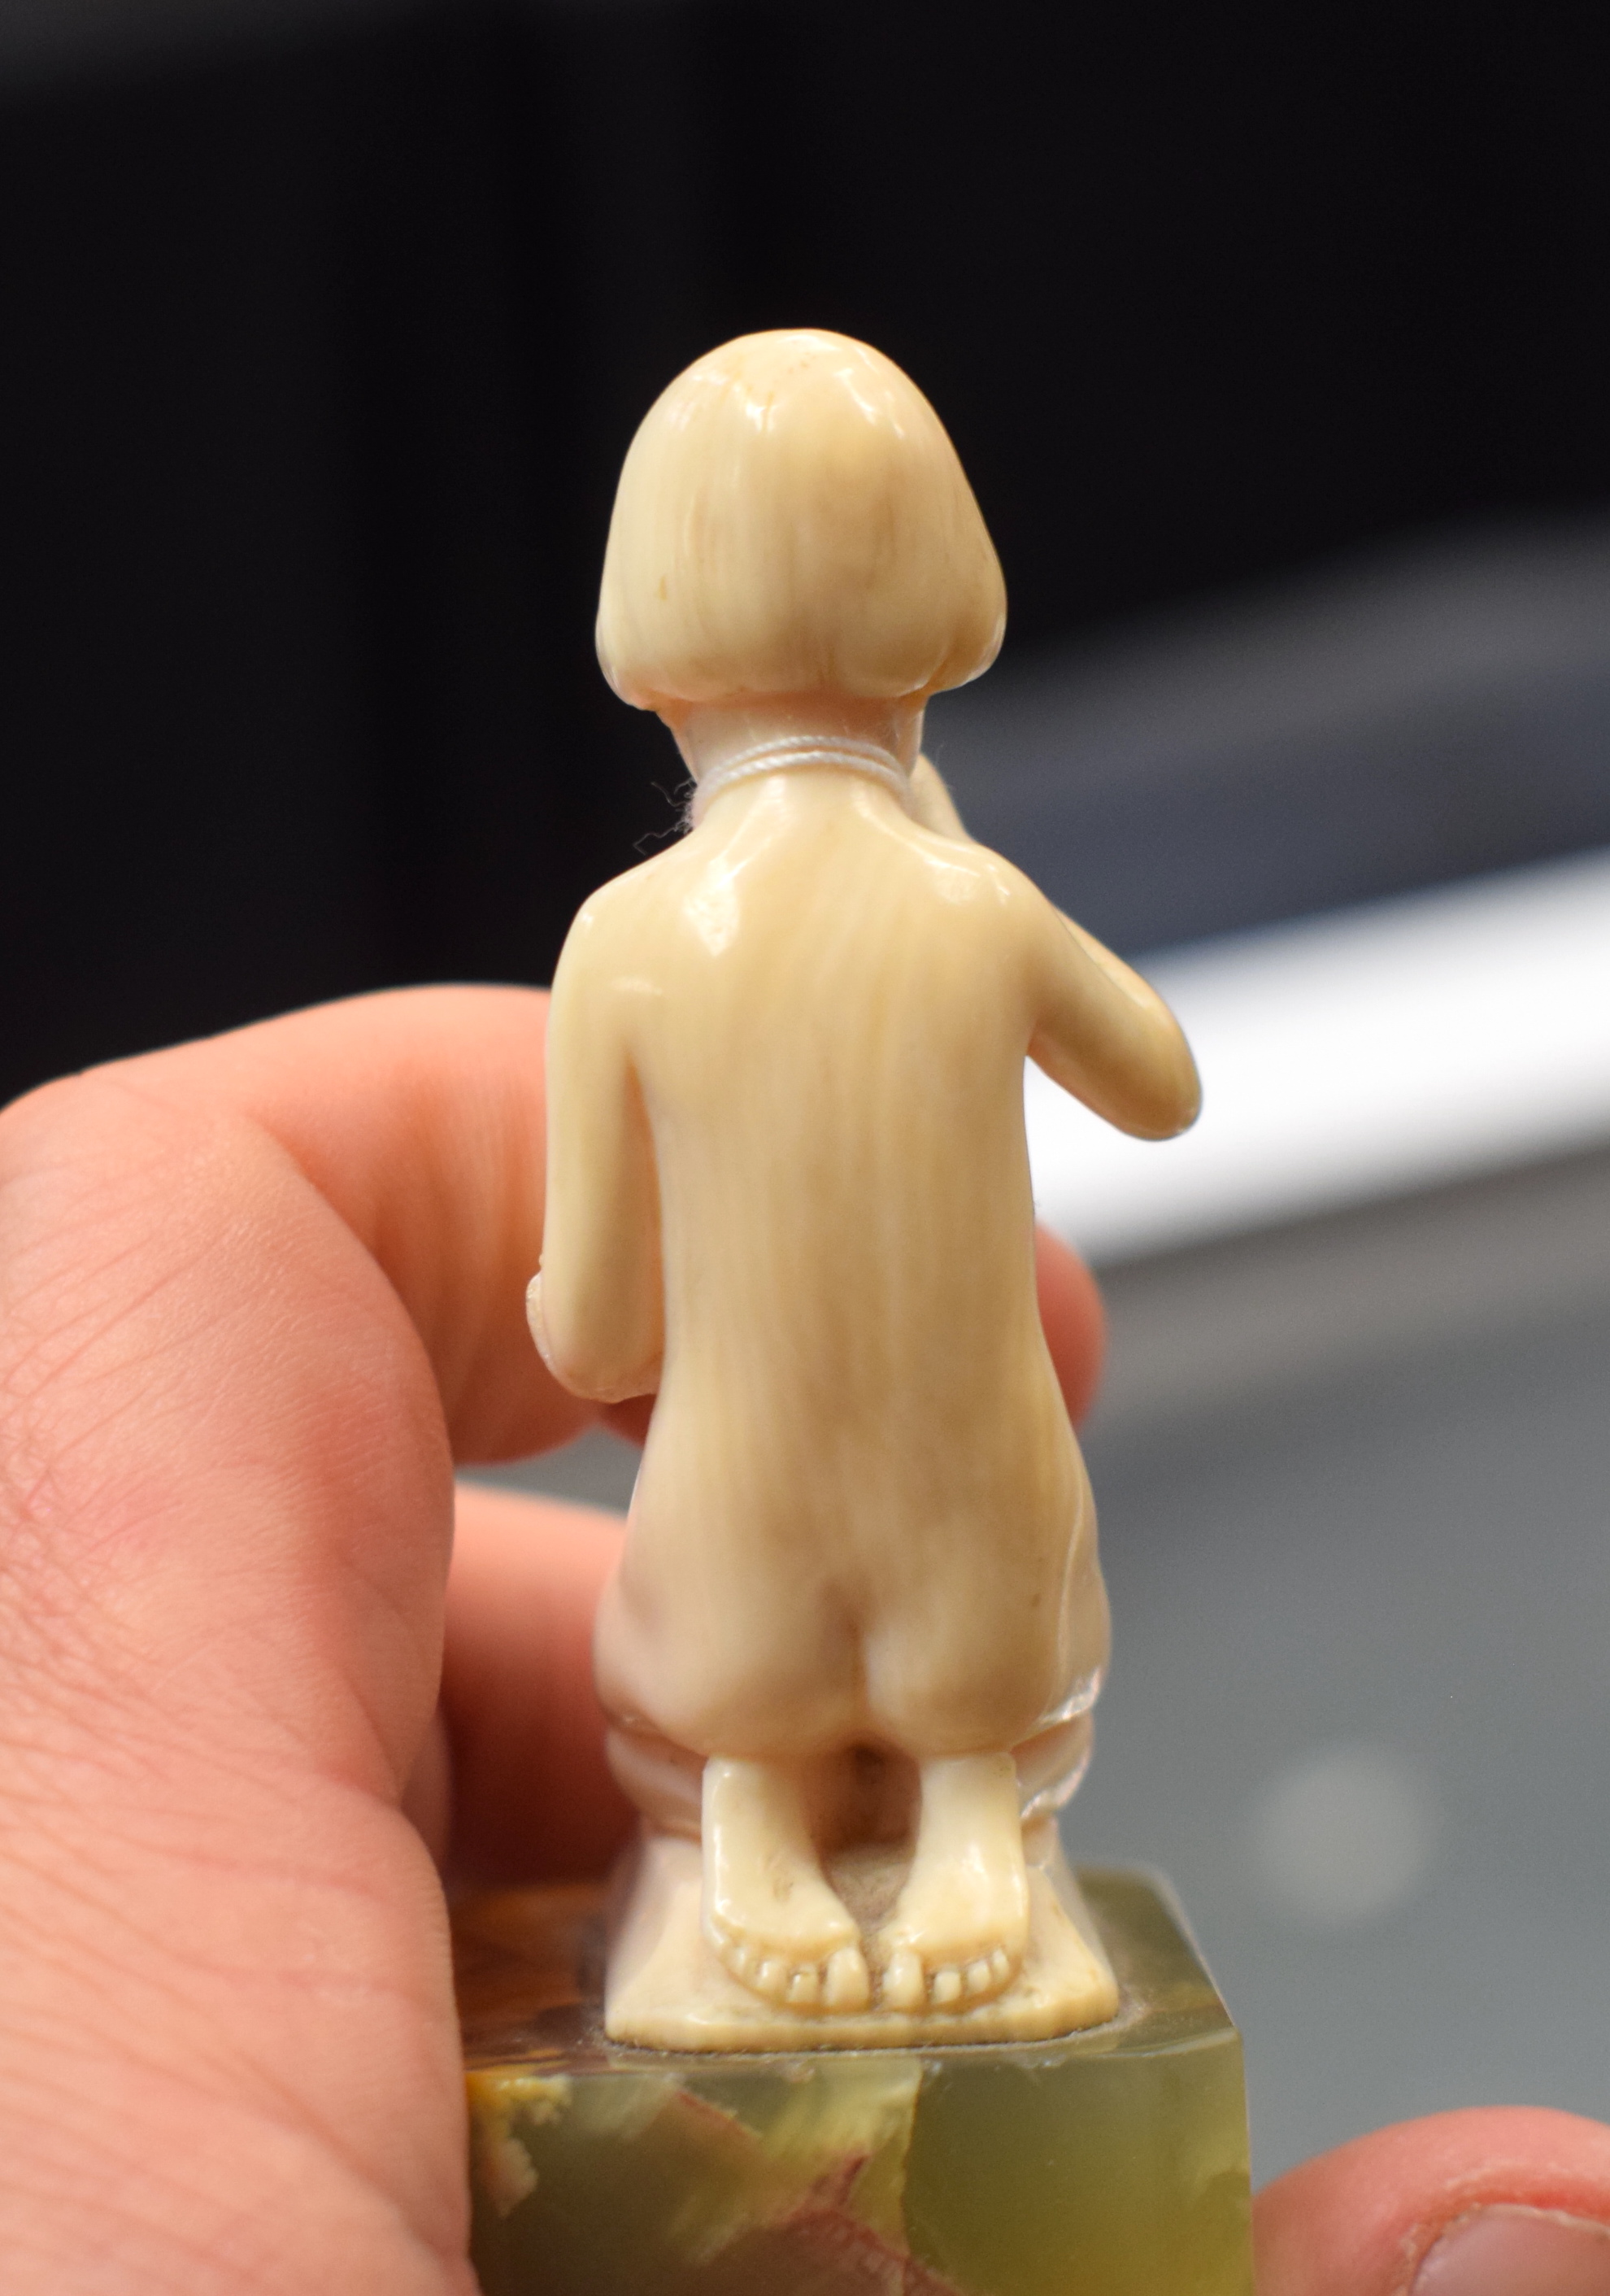 AN ART DECO CARVED IVORY FIGURE OF A BUBBLE BLOWING GIRL by Ferdinand Preiss (1882-1943), modelled - Image 8 of 11